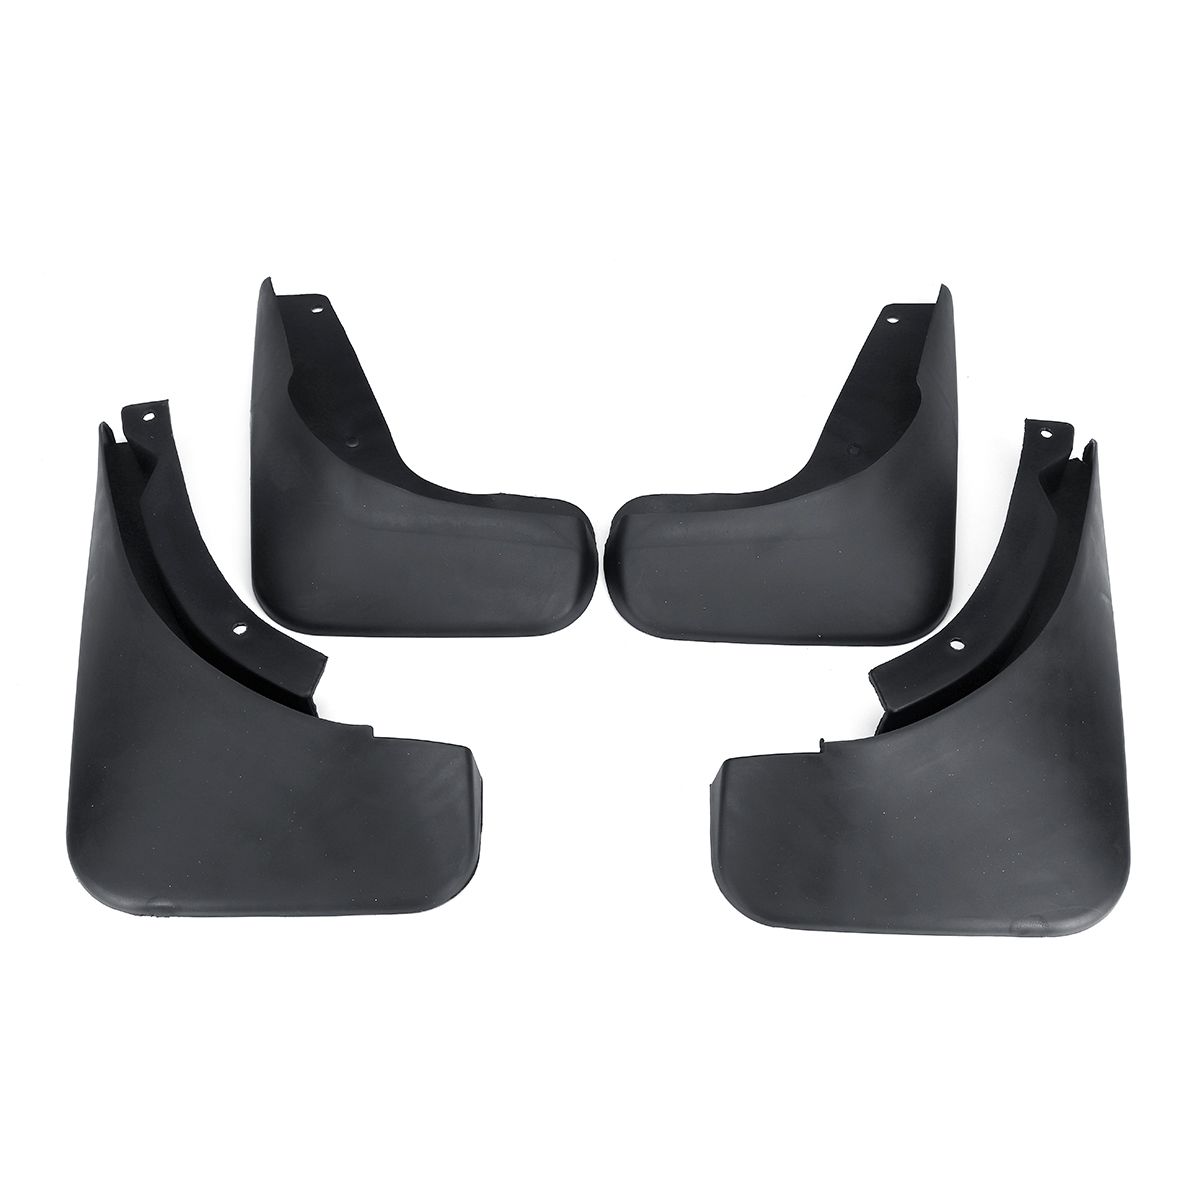 Front-And-Rear-Mud-Flaps-Car-Mudguards-For-VW-Jetta-2006-2011-1406566